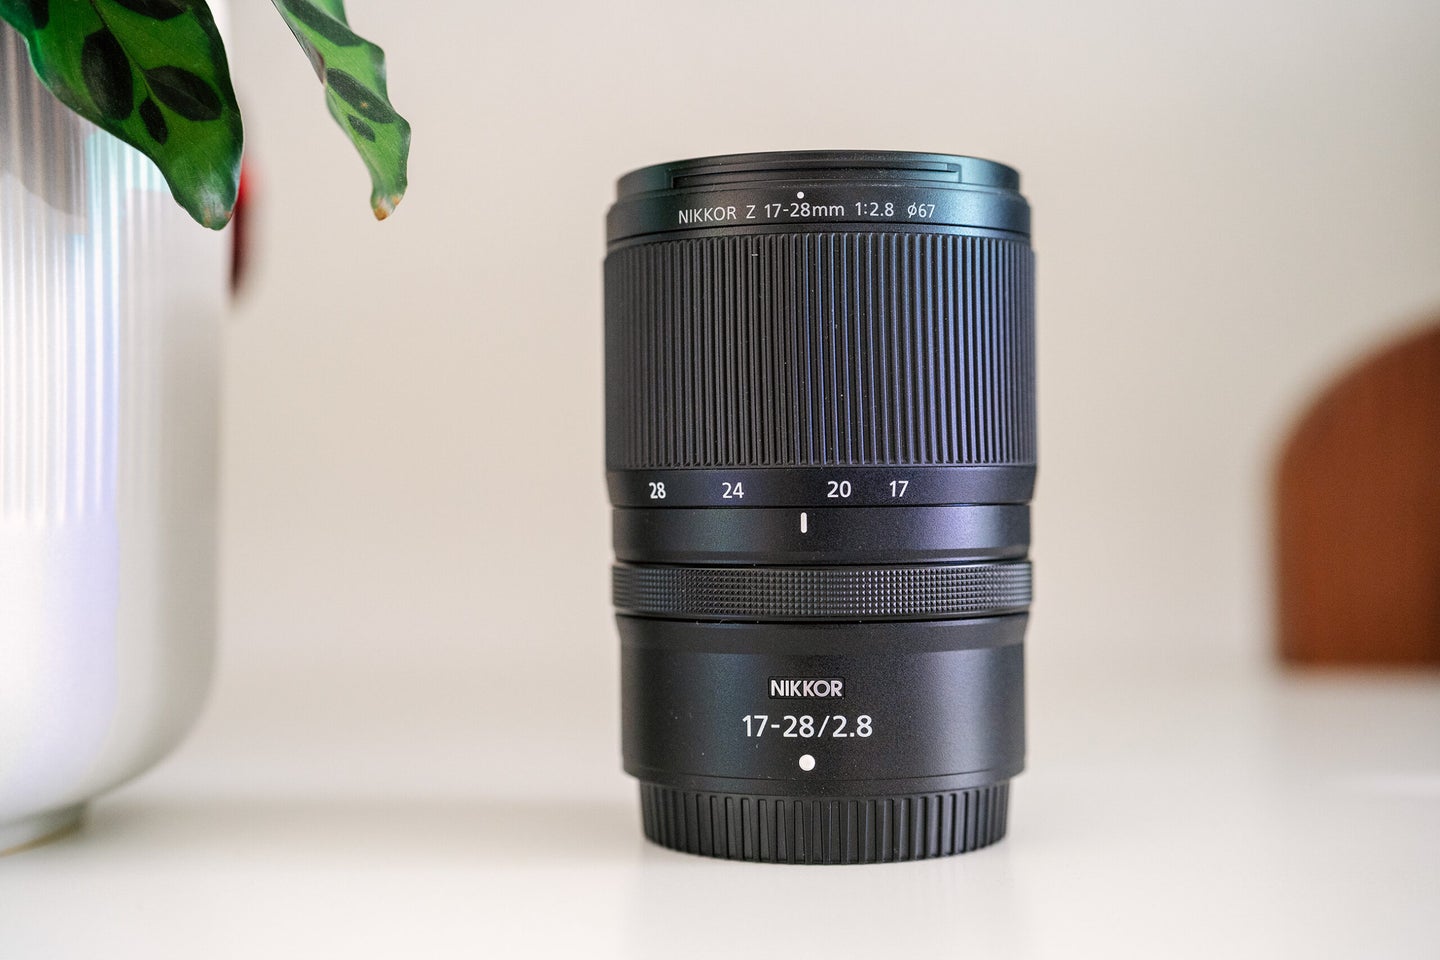 Nikon NIKKOR Z 17-28mm f/2.8 lens on a shelf with a potted plant